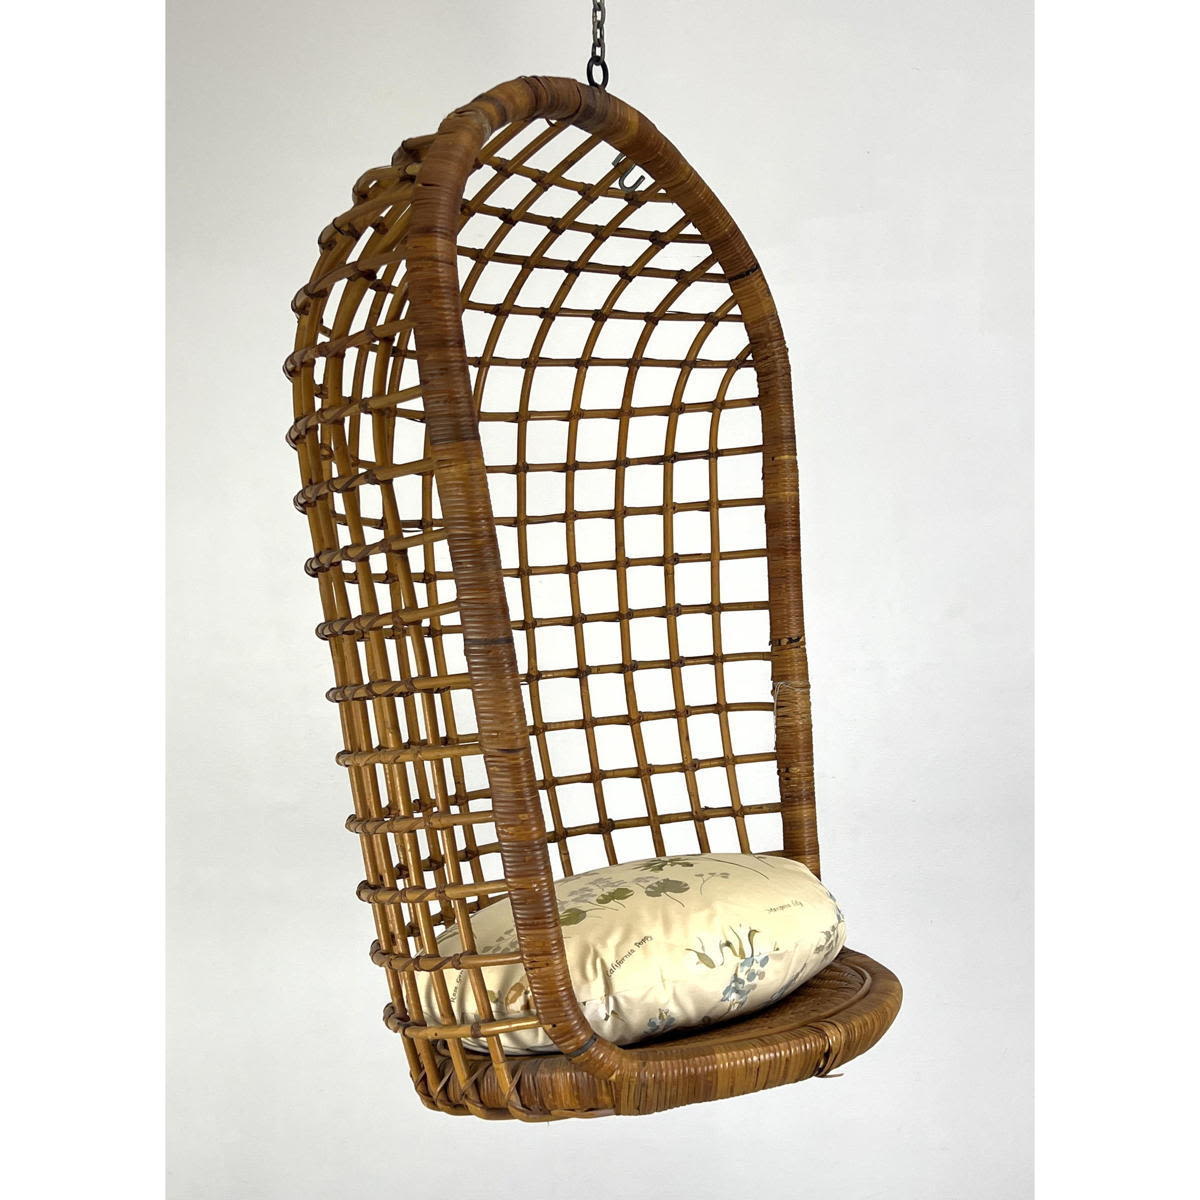 Hooded Woven Rattan Hanging Cage 2b8570